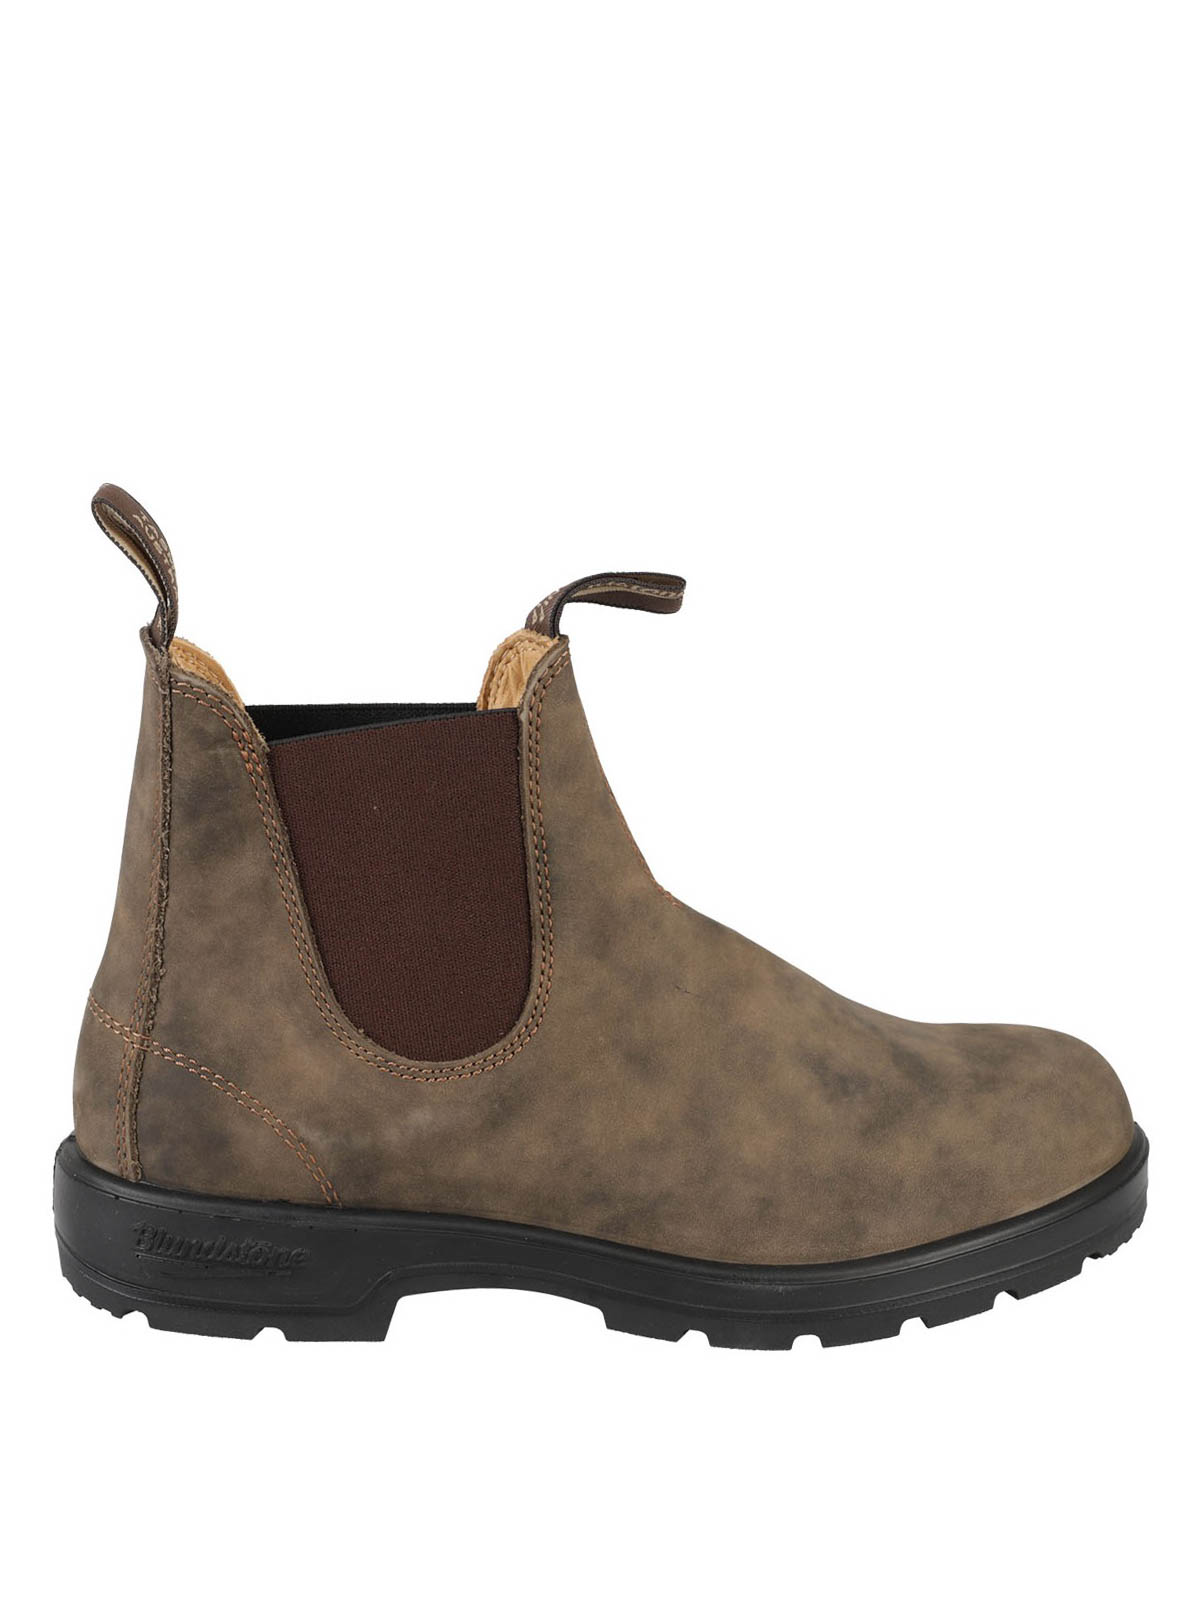 Ankle boots Blundstone - Suede Chelsea boots - 585URUSTICBROWN | iKRIX.com